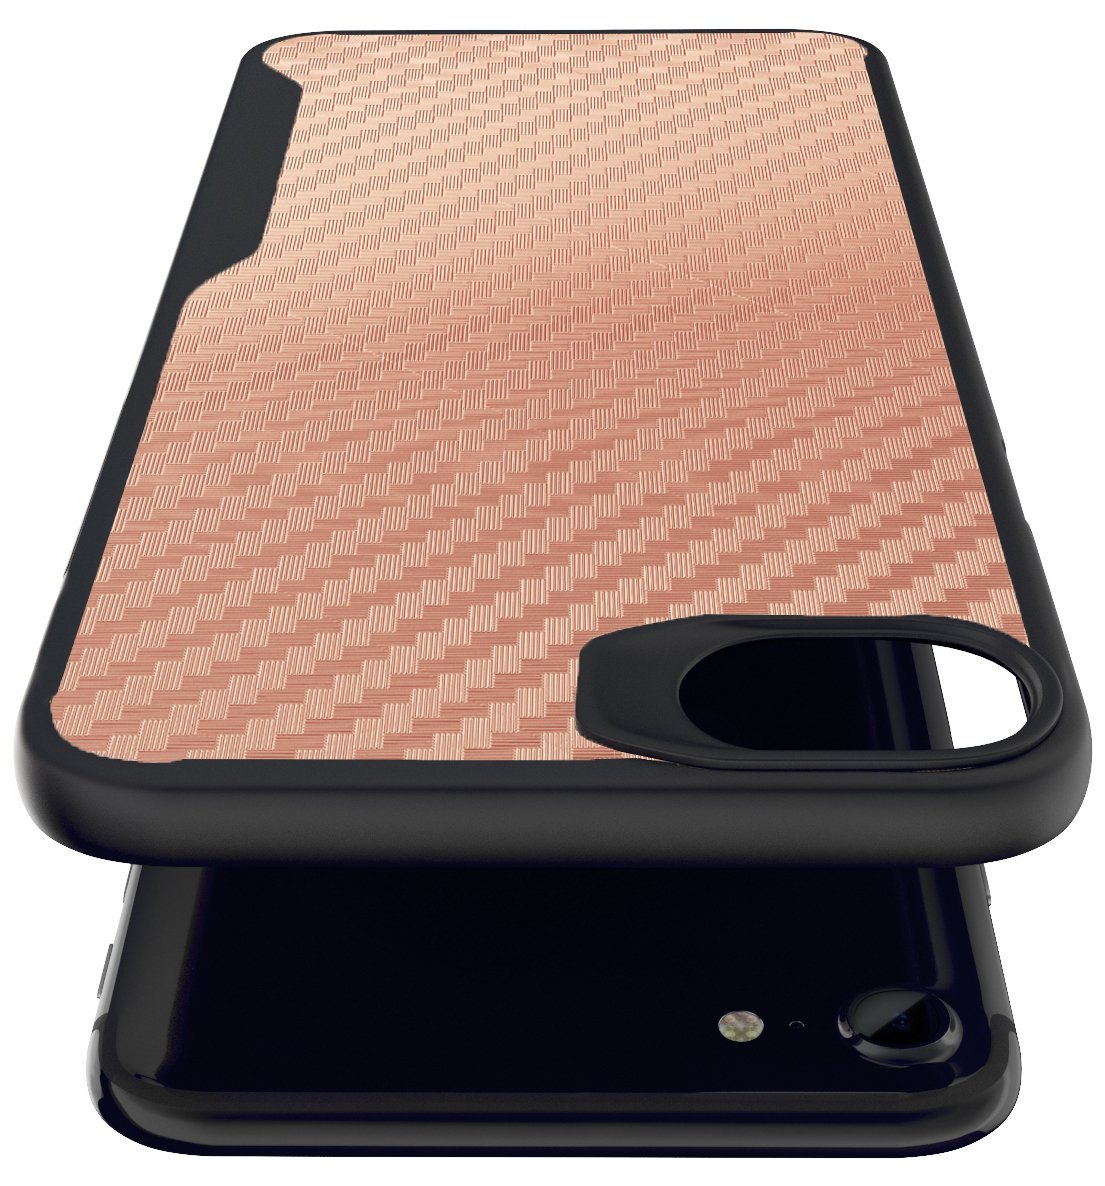 iPhone 7 / iPhone 8 Kitoo Carbon Fiber Pattern Case Gold